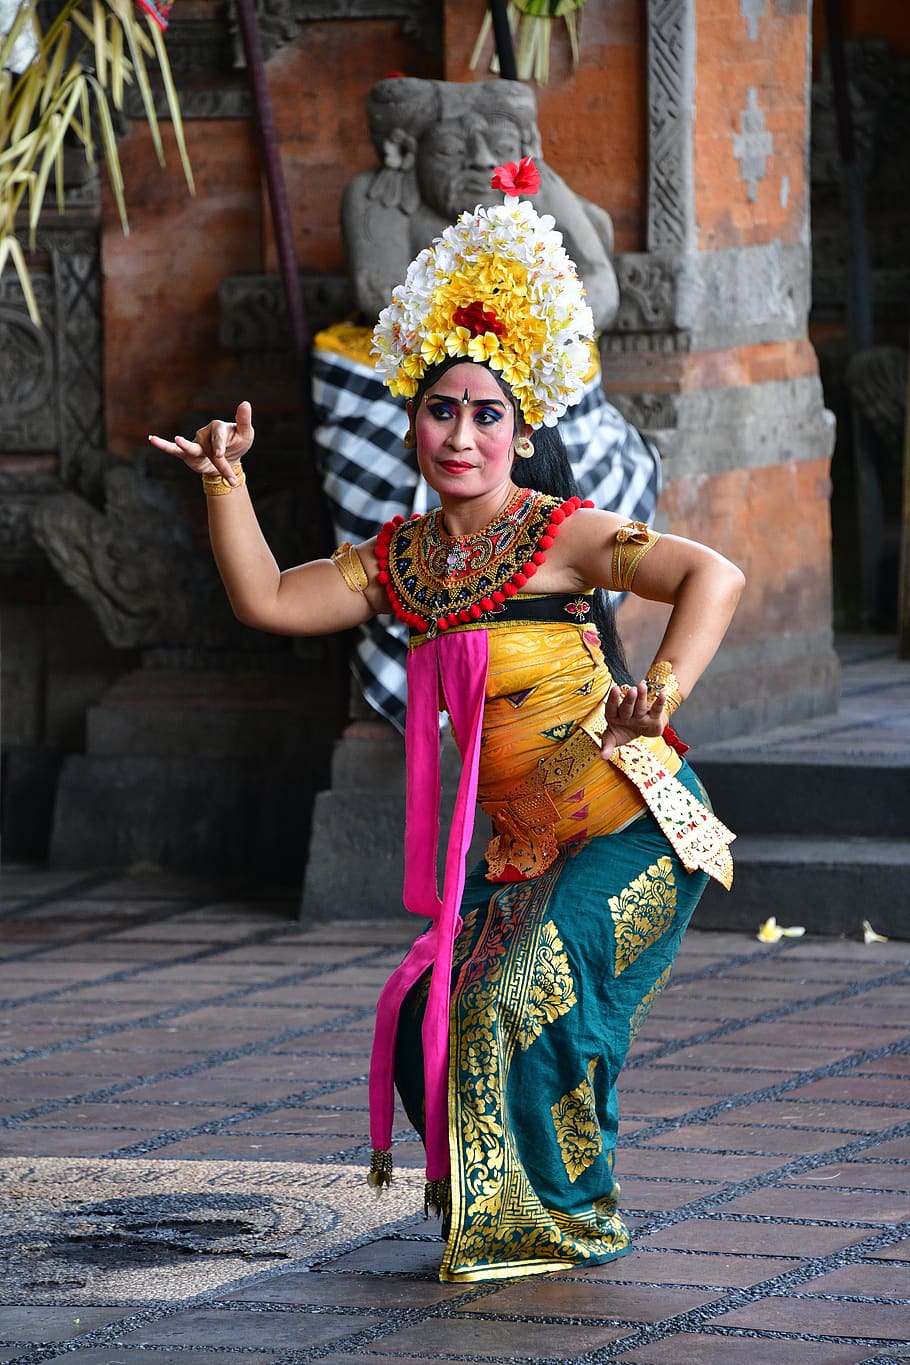 bali, dancer, indonesia, tradition, dance, costume, people, girl, travel, culture